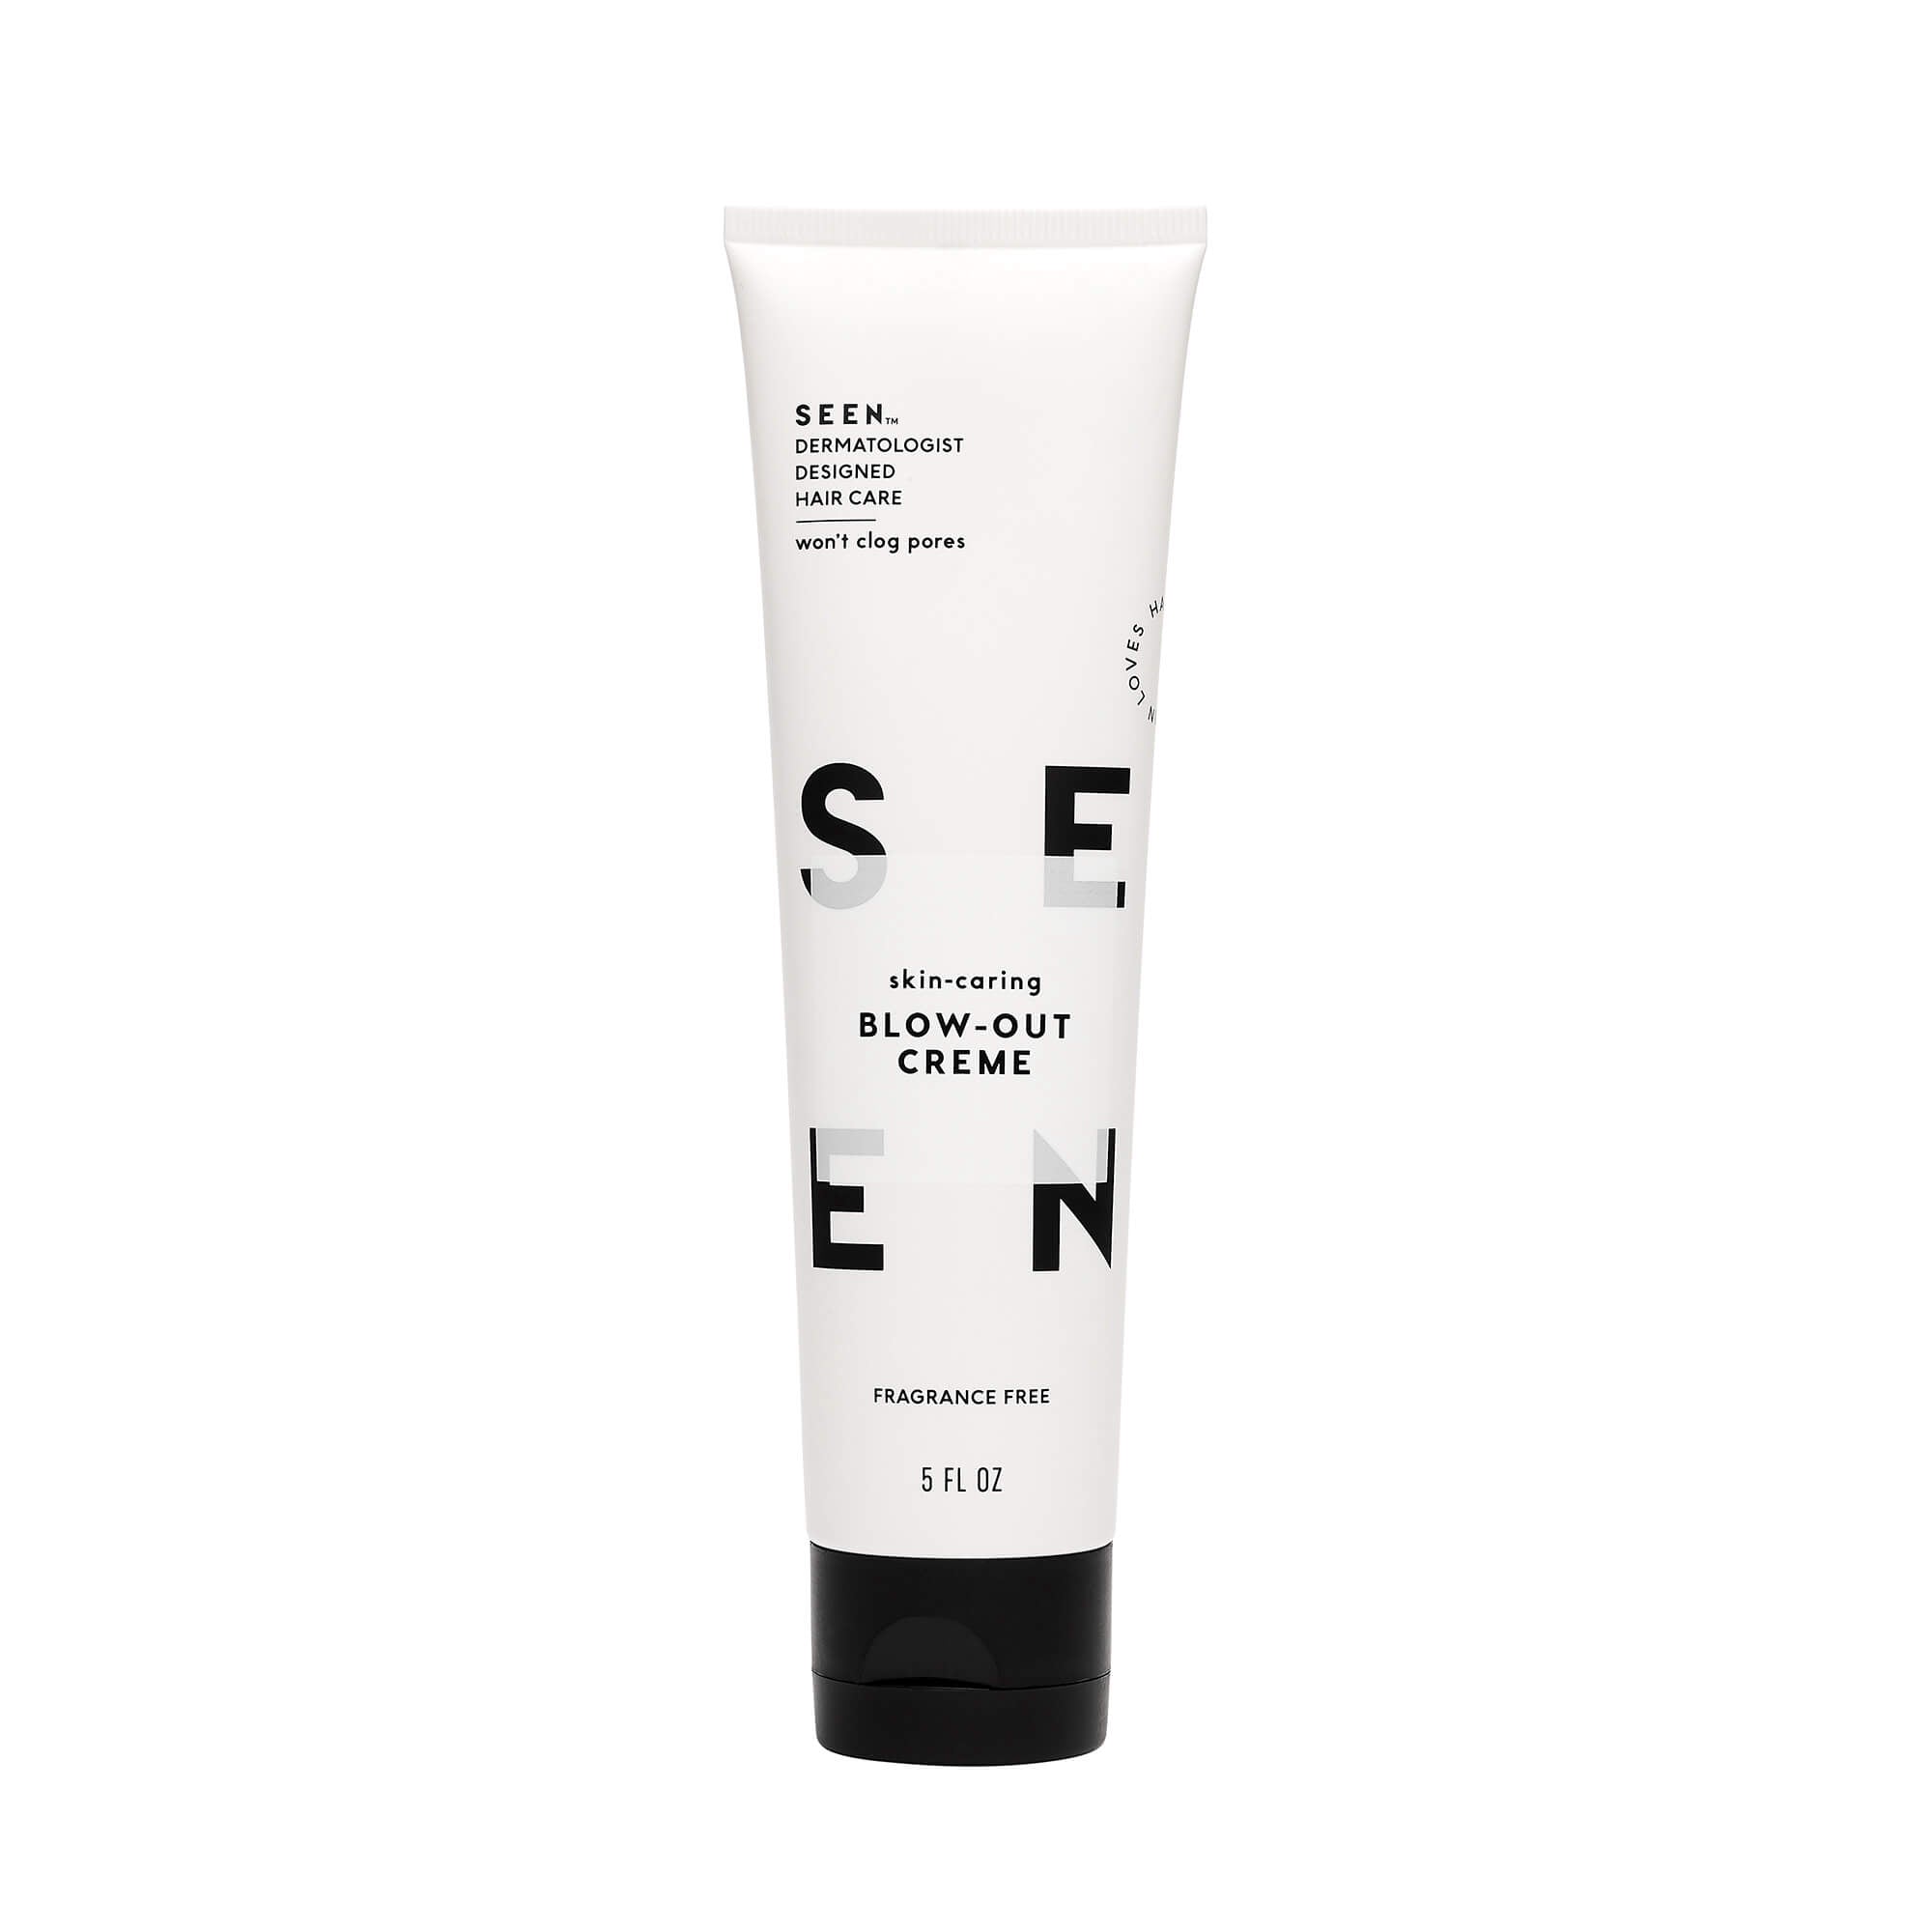 Image of SEEN Blow-Out Creme, FF